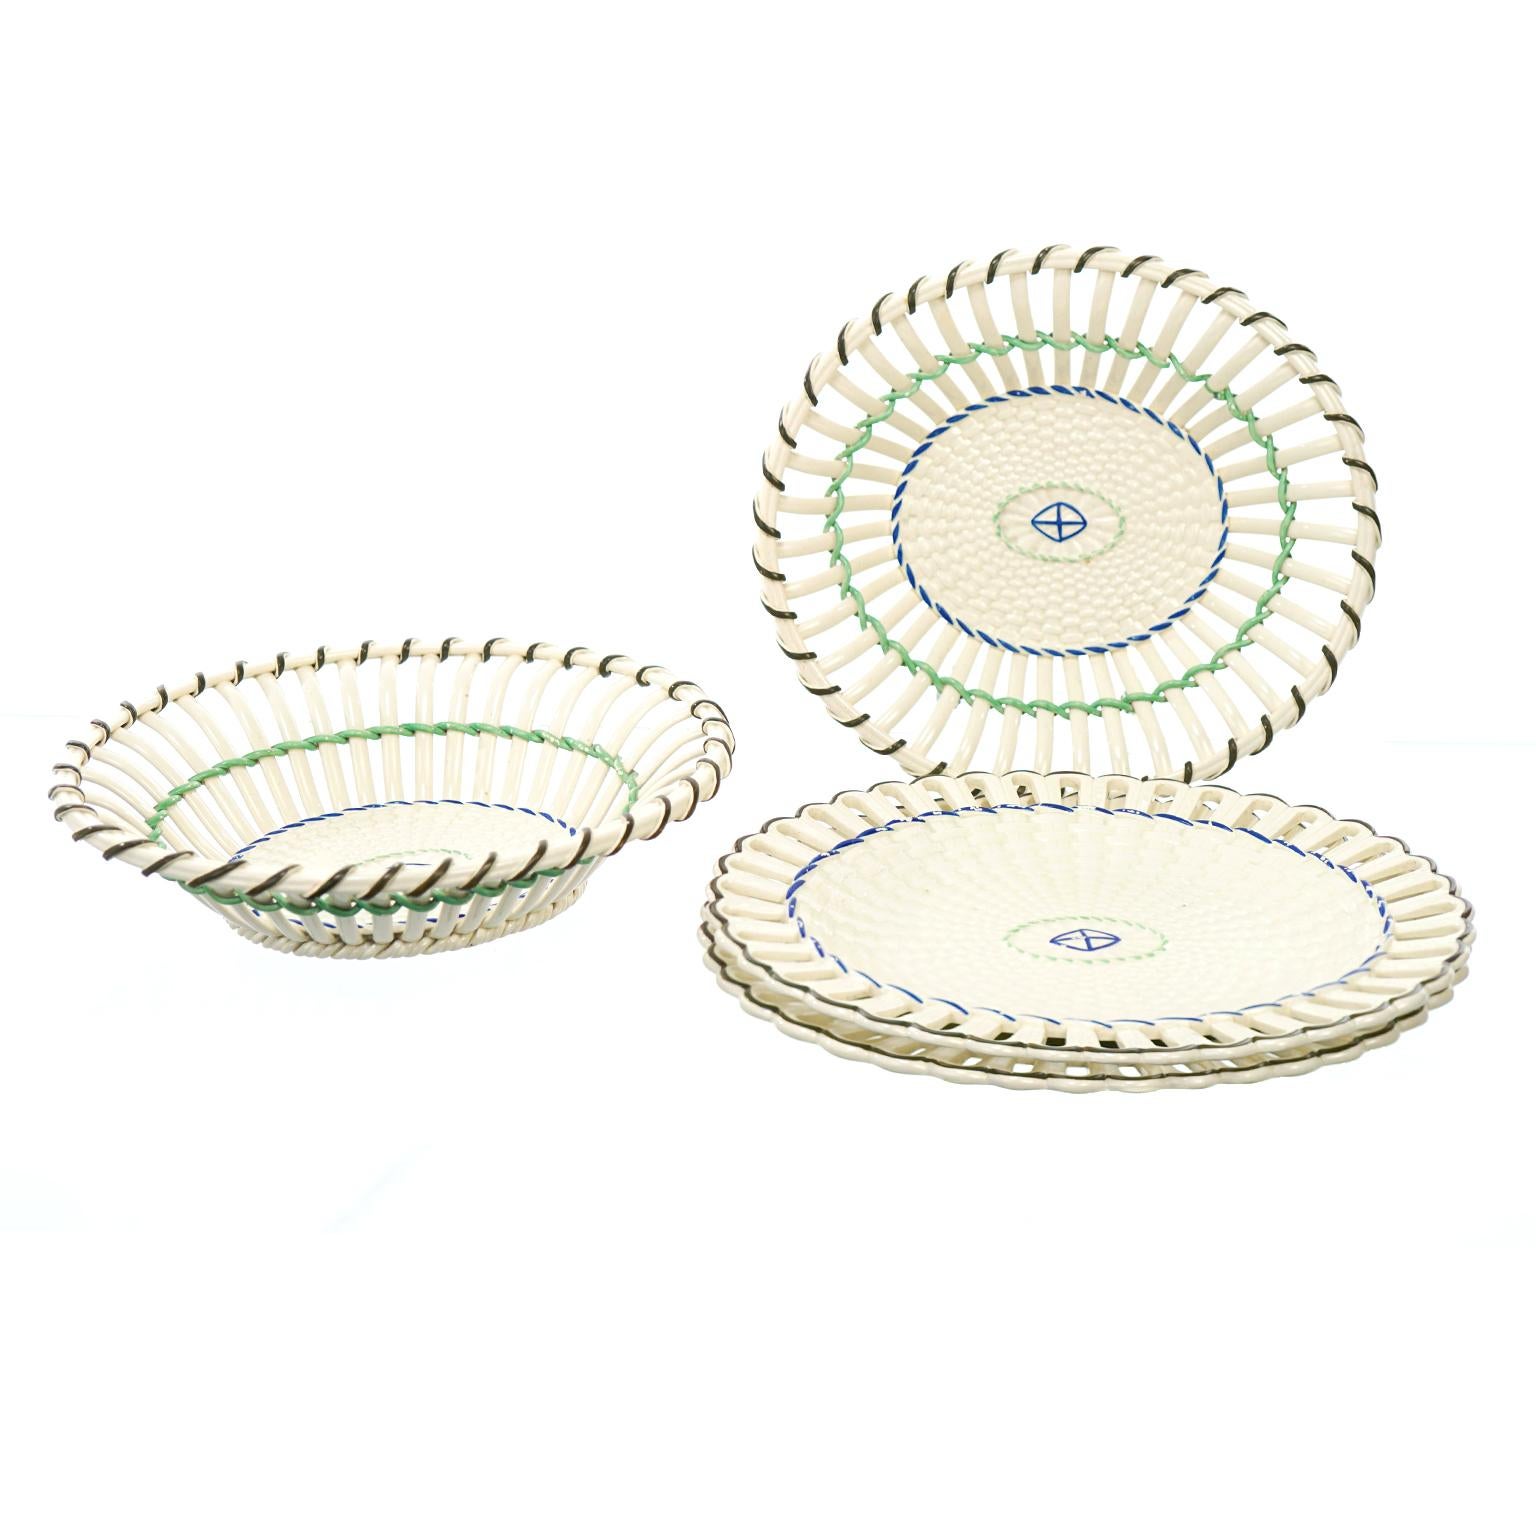 Pair of Wedgwood Creamware Chestnut Baskets and Underplates For Sale 5